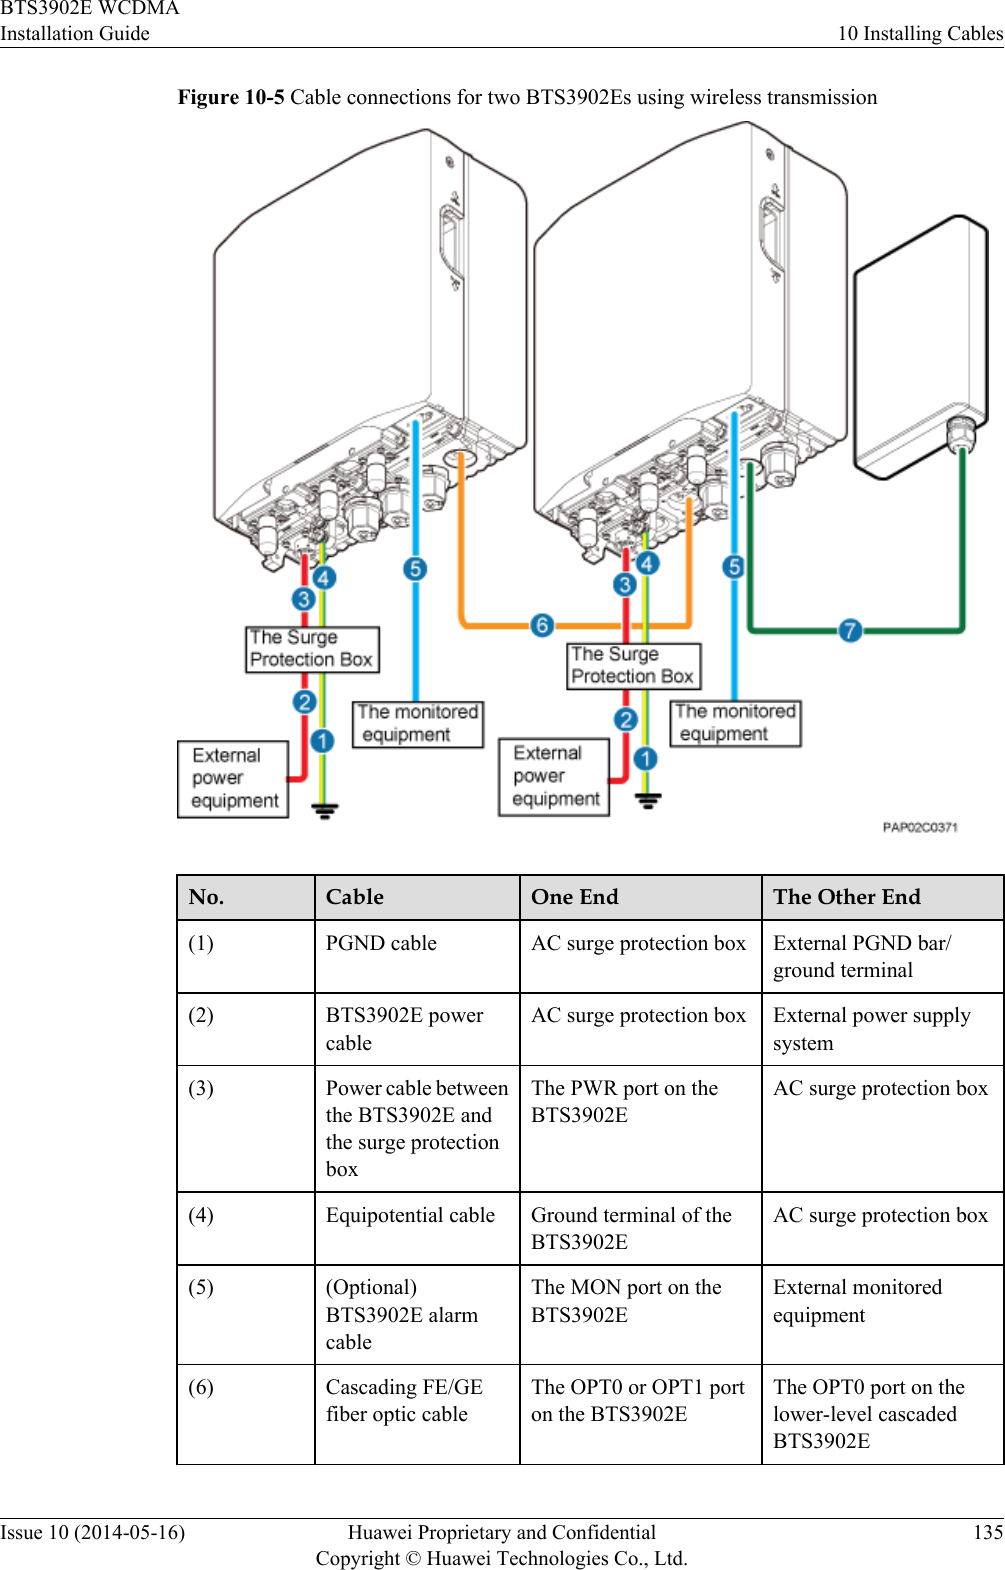 Figure 10-5 Cable connections for two BTS3902Es using wireless transmissionNo. Cable One End The Other End(1) PGND cable AC surge protection box External PGND bar/ground terminal(2) BTS3902E powercableAC surge protection box External power supplysystem(3) Power cable betweenthe BTS3902E andthe surge protectionboxThe PWR port on theBTS3902EAC surge protection box(4) Equipotential cable Ground terminal of theBTS3902EAC surge protection box(5) (Optional)BTS3902E alarmcableThe MON port on theBTS3902EExternal monitoredequipment(6) Cascading FE/GEfiber optic cableThe OPT0 or OPT1 porton the BTS3902EThe OPT0 port on thelower-level cascadedBTS3902EBTS3902E WCDMAInstallation Guide 10 Installing CablesIssue 10 (2014-05-16) Huawei Proprietary and ConfidentialCopyright © Huawei Technologies Co., Ltd.135